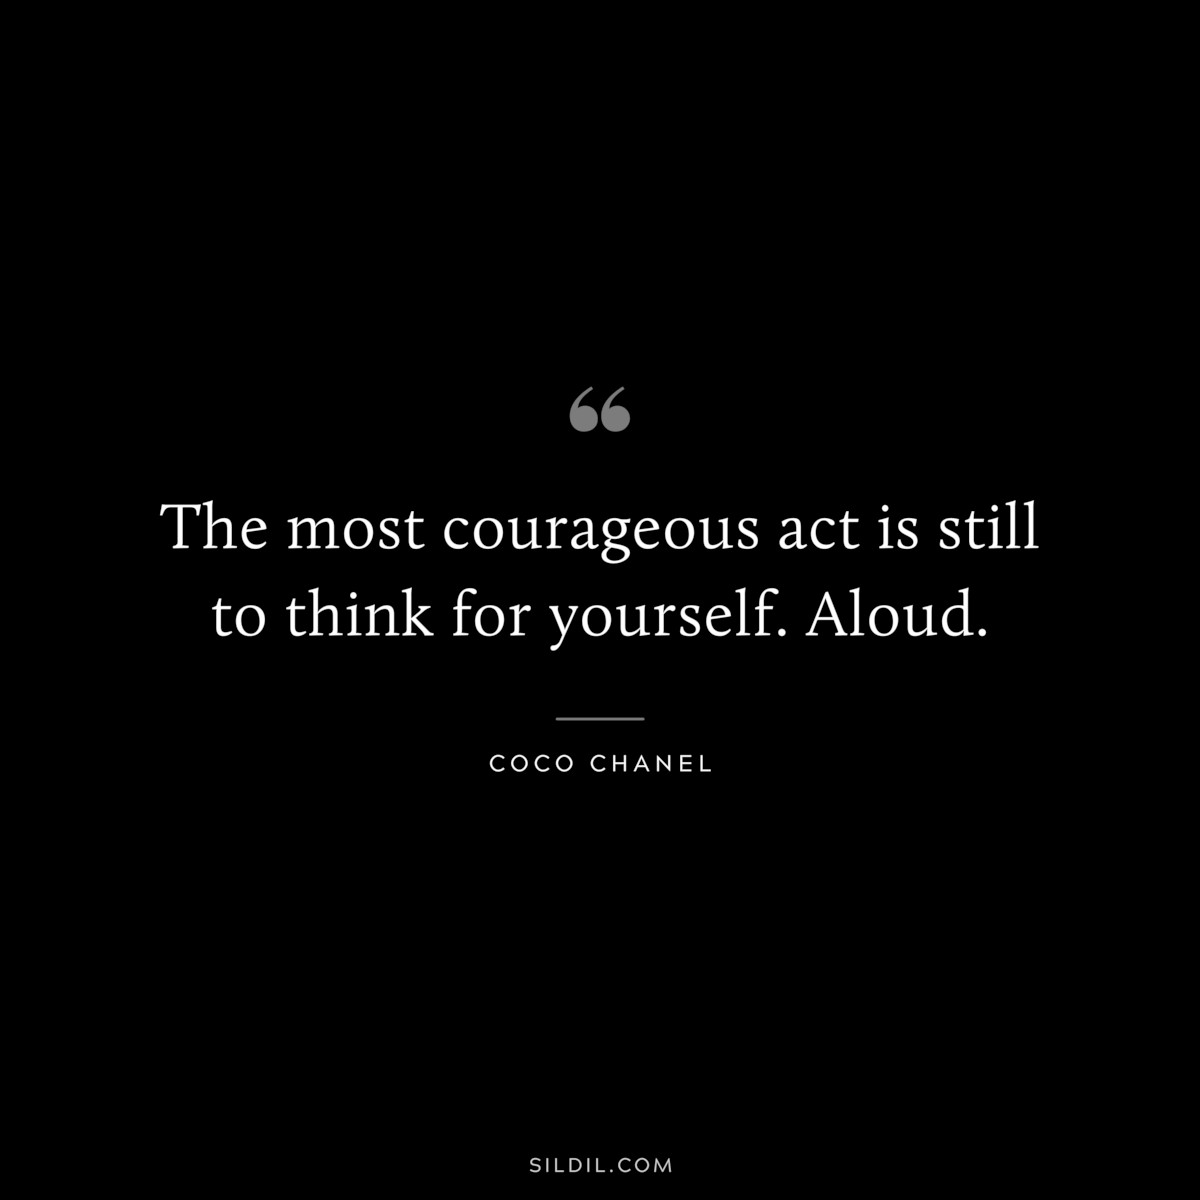 The most courageous act is still to think for yourself. Aloud. ― Coco Chanel